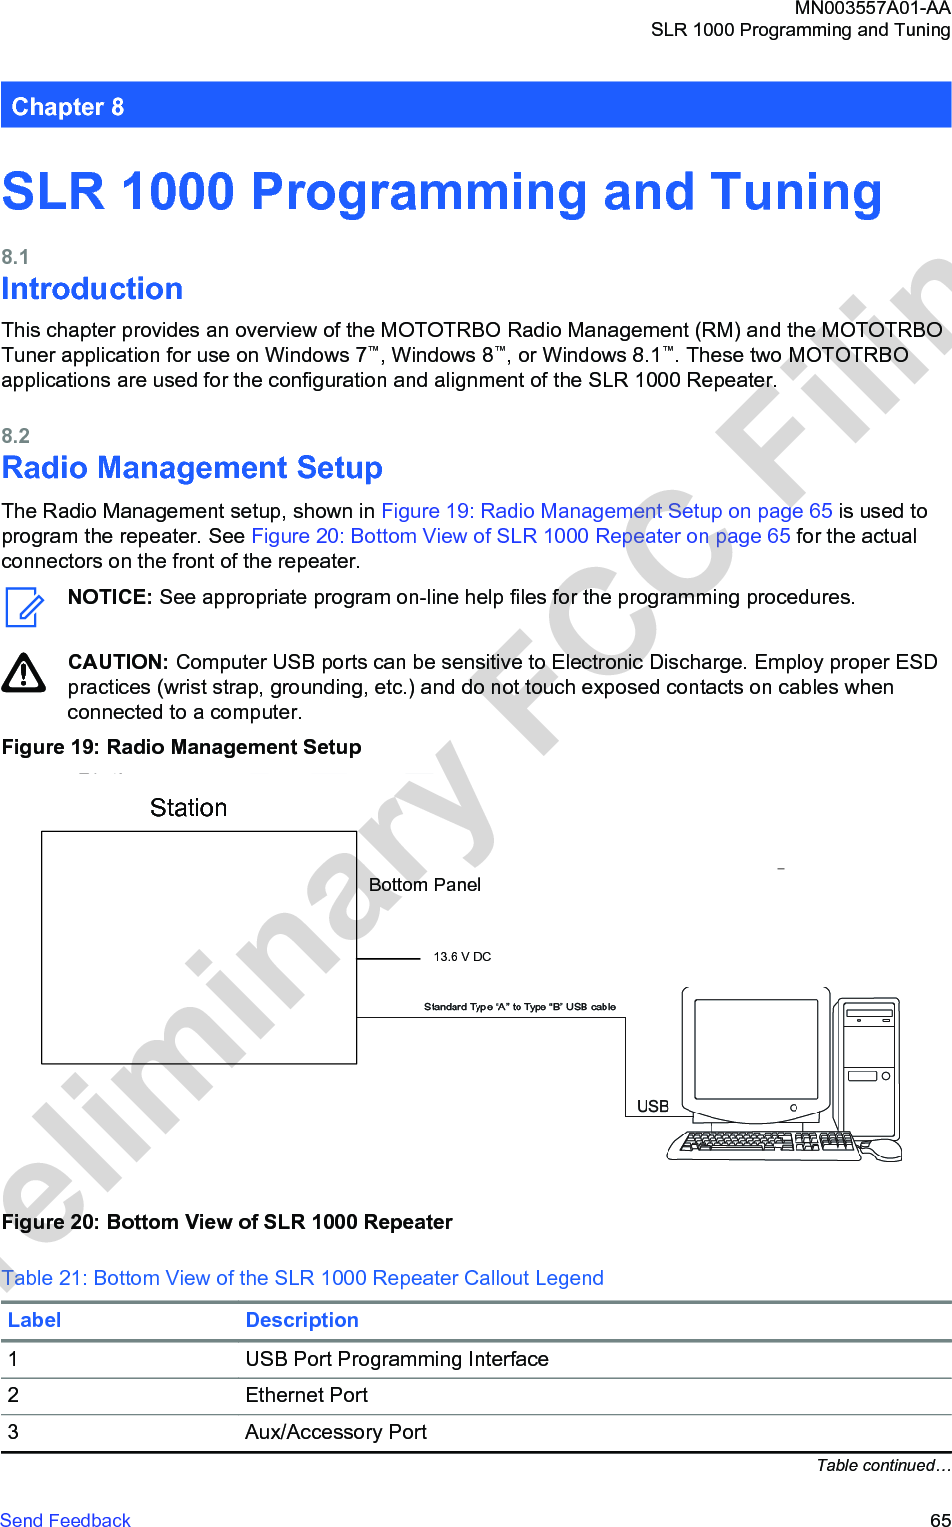 Chapter 8SLR 1000 Programming and Tuning8.1IntroductionThis chapter provides an overview of the MOTOTRBO Radio Management (RM) and the MOTOTRBOTuner application for use on Windows 7™, Windows 8™, or Windows 8.1™. These two MOTOTRBOapplications are used for the configuration and alignment of the SLR 1000 Repeater.8.2Radio Management SetupThe Radio Management setup, shown in Figure 19: Radio Management Setup on page 65 is used toprogram the repeater. See Figure 20: Bottom View of SLR 1000 Repeater on page 65 for the actualconnectors on the front of the repeater.NOTICE: See appropriate program on-line help files for the programming procedures.CAUTION: Computer USB ports can be sensitive to Electronic Discharge. Employ proper ESDpractices (wrist strap, grounding, etc.) and do not touch exposed contacts on cables whenconnected to a computer.Figure 19: Radio Management SetupStationBottom Panel13.6 V DCFigure 20: Bottom View of SLR 1000 RepeaterTable 21: Bottom View of the SLR 1000 Repeater Callout LegendLabel Description1 USB Port Programming Interface2 Ethernet Port3 Aux/Accessory PortTable continued…MN003557A01-AASLR 1000 Programming and TuningSend Feedback   65Preliminary FCC Filing